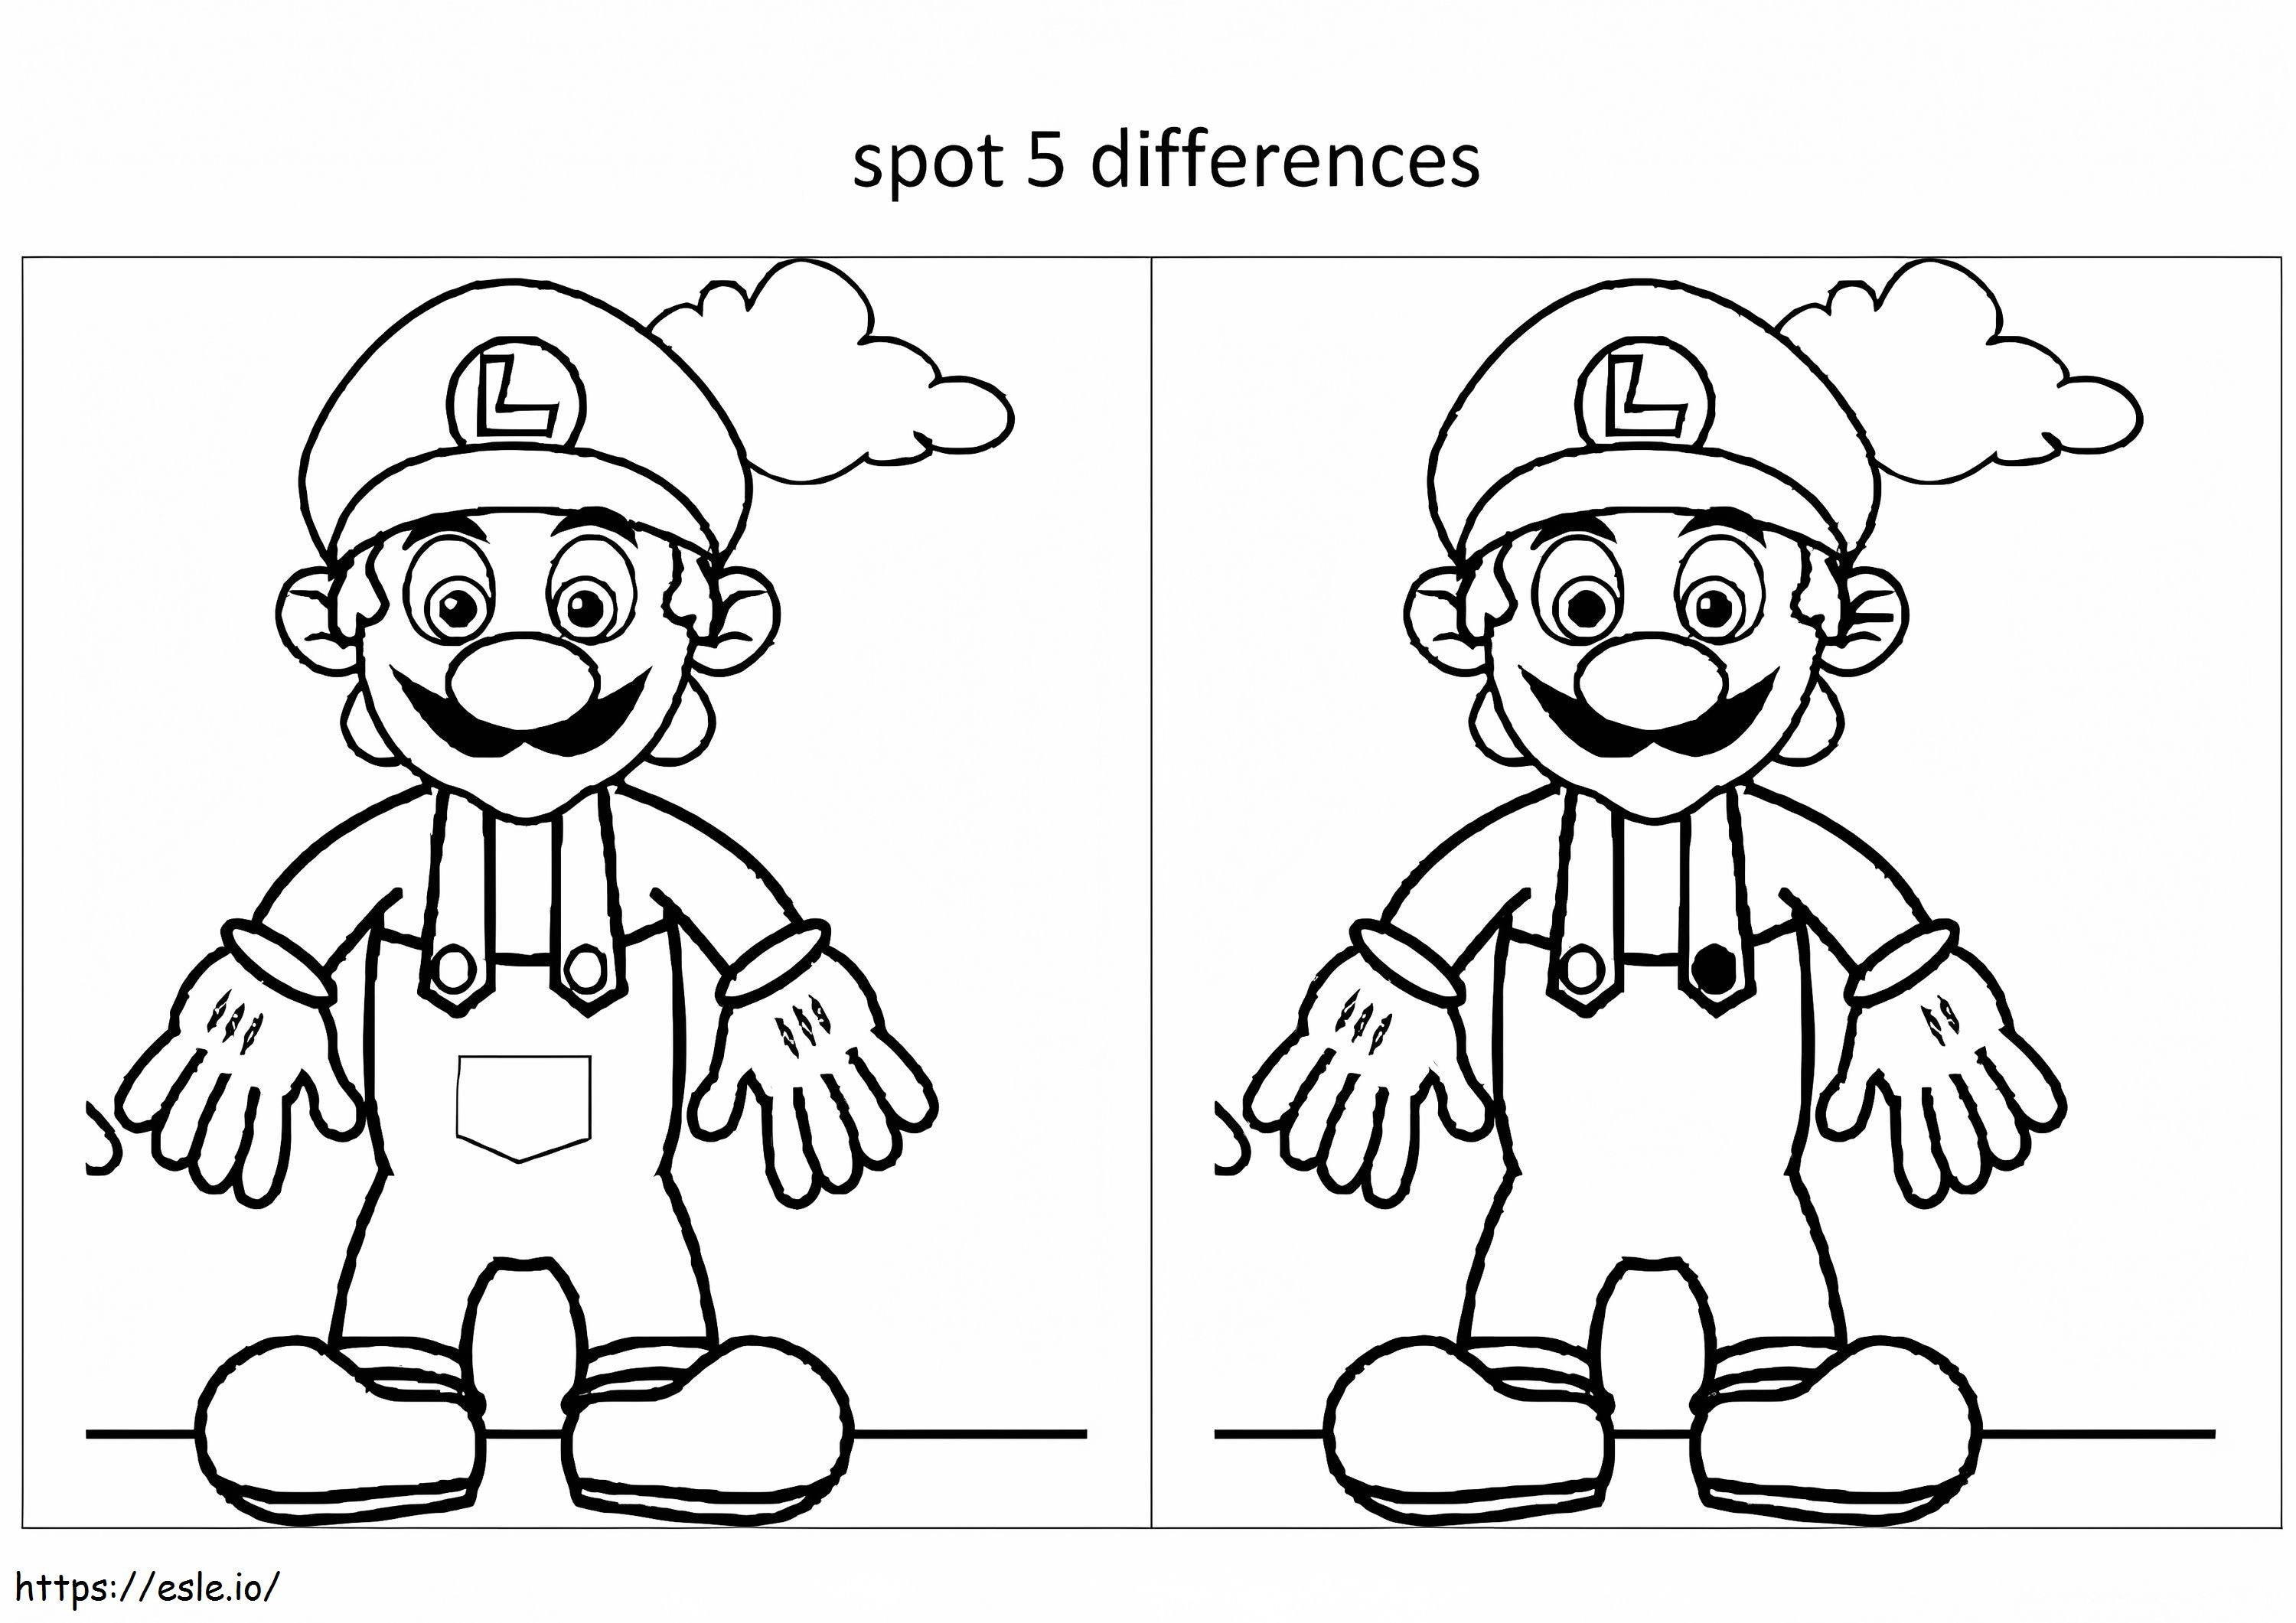 Printable Spot 5 Differences coloring page